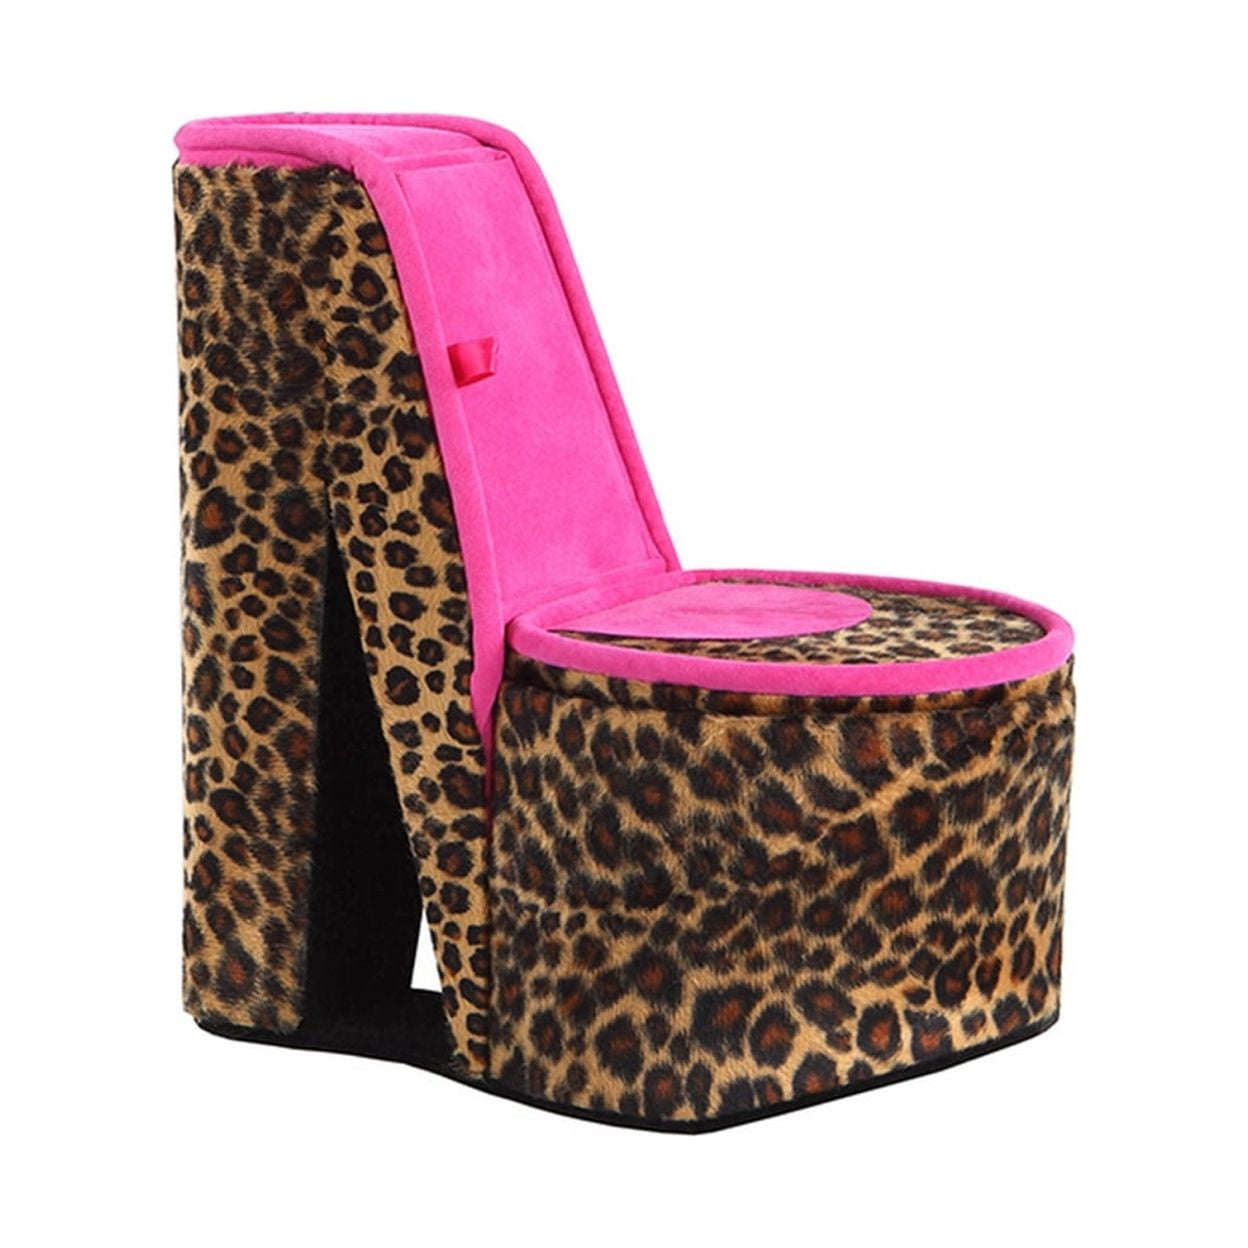 Picture of Benzara BM240365 High Heel Cheetah Shoe Jewelry Box with 2 Hooks, Multi Color